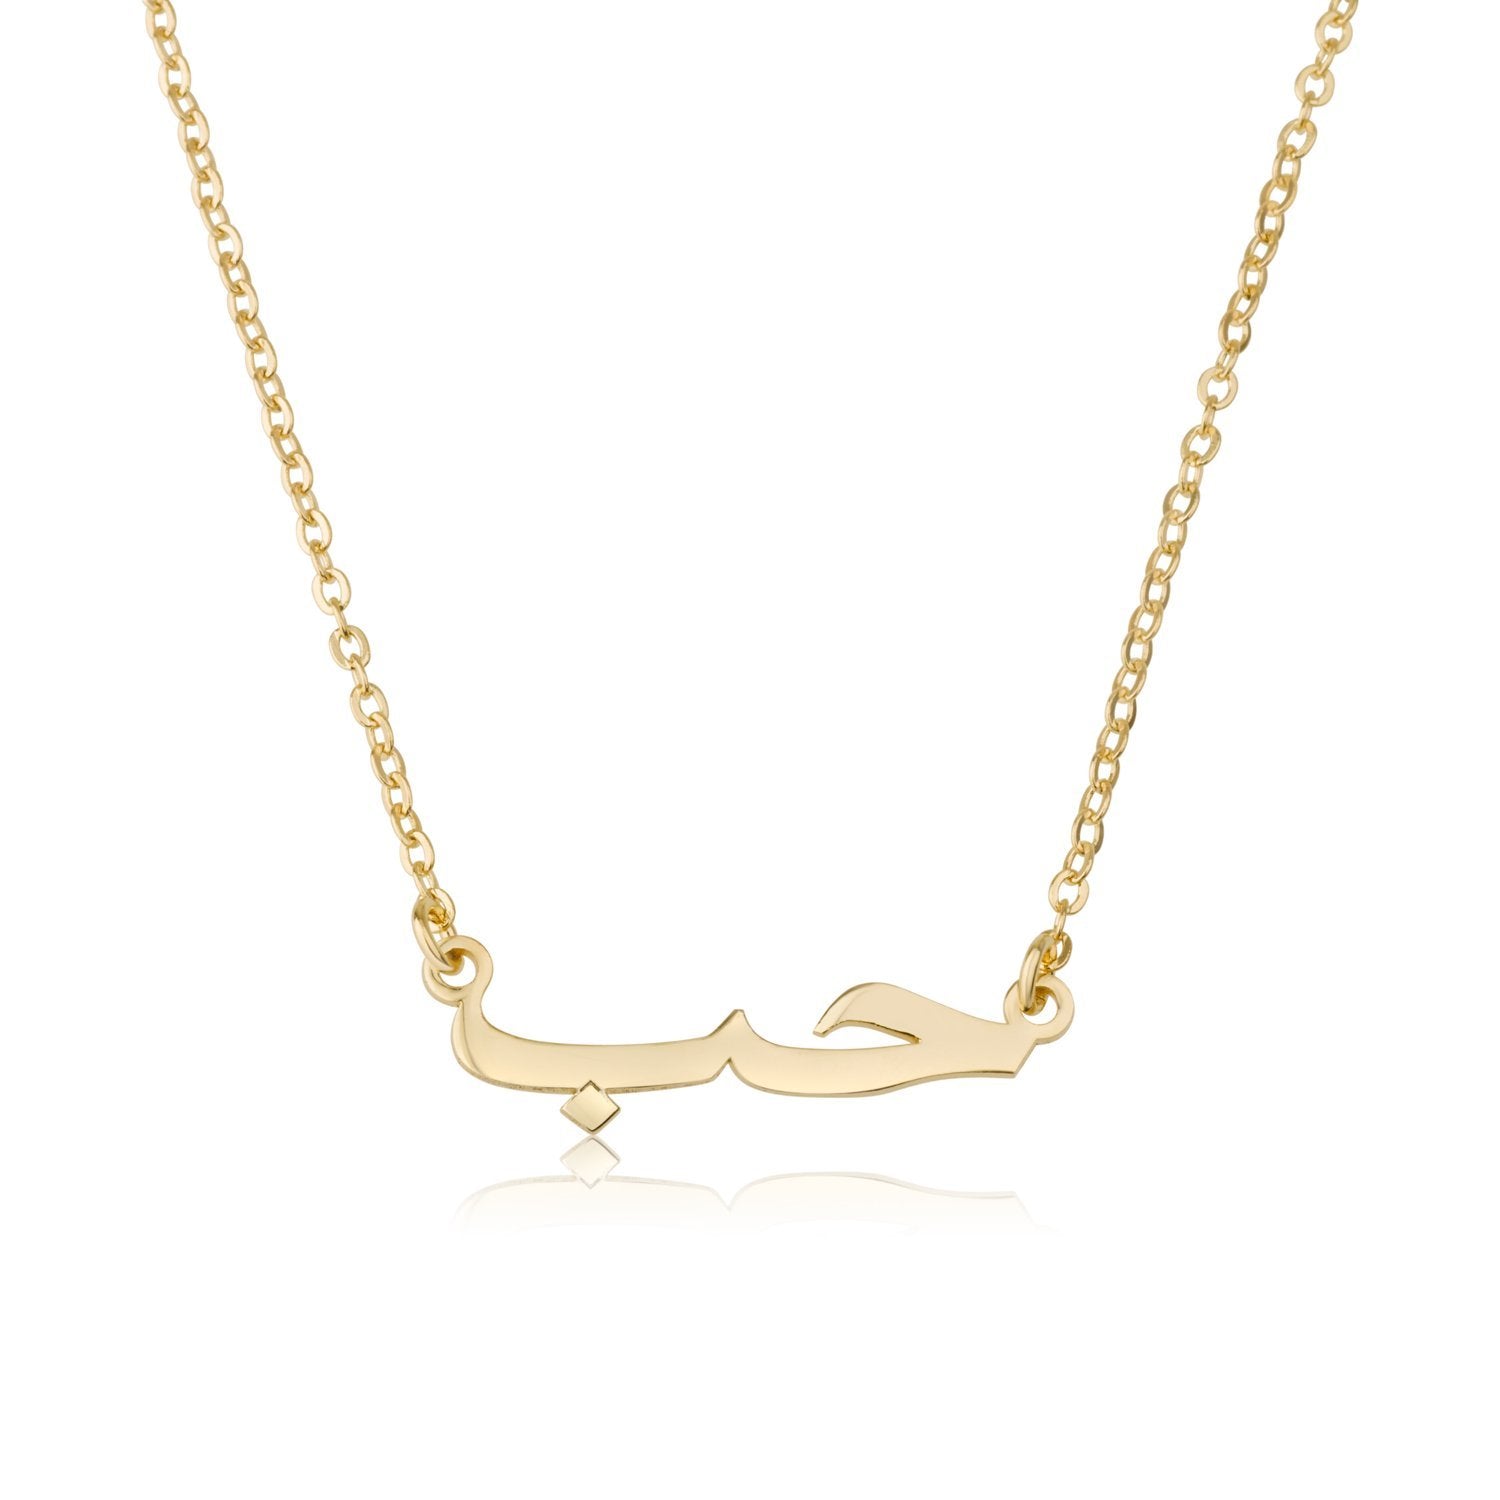 Arabic Name Necklace with Cutout Design in 18k Yellow Gold Plated Silver -  